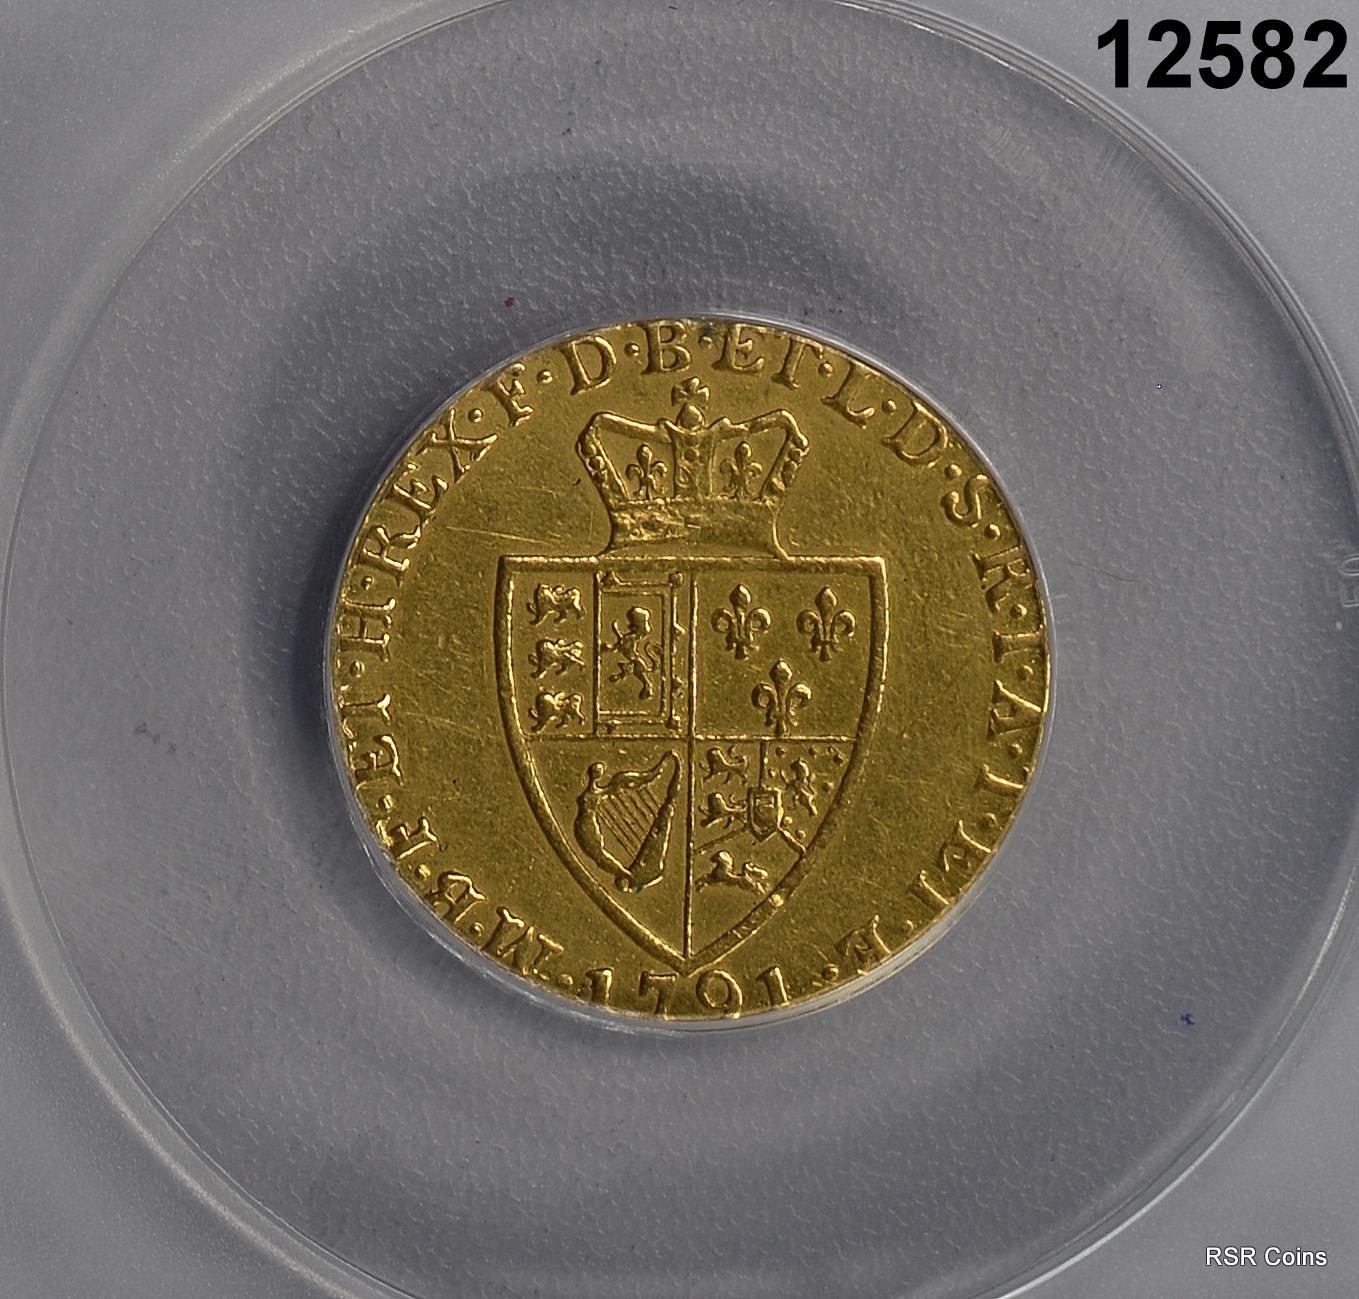 1791 GREAT BRITAIN 1 GUINEA 22 CARAT GOLD COIN ANACS CERTIFIED VF20 #12582